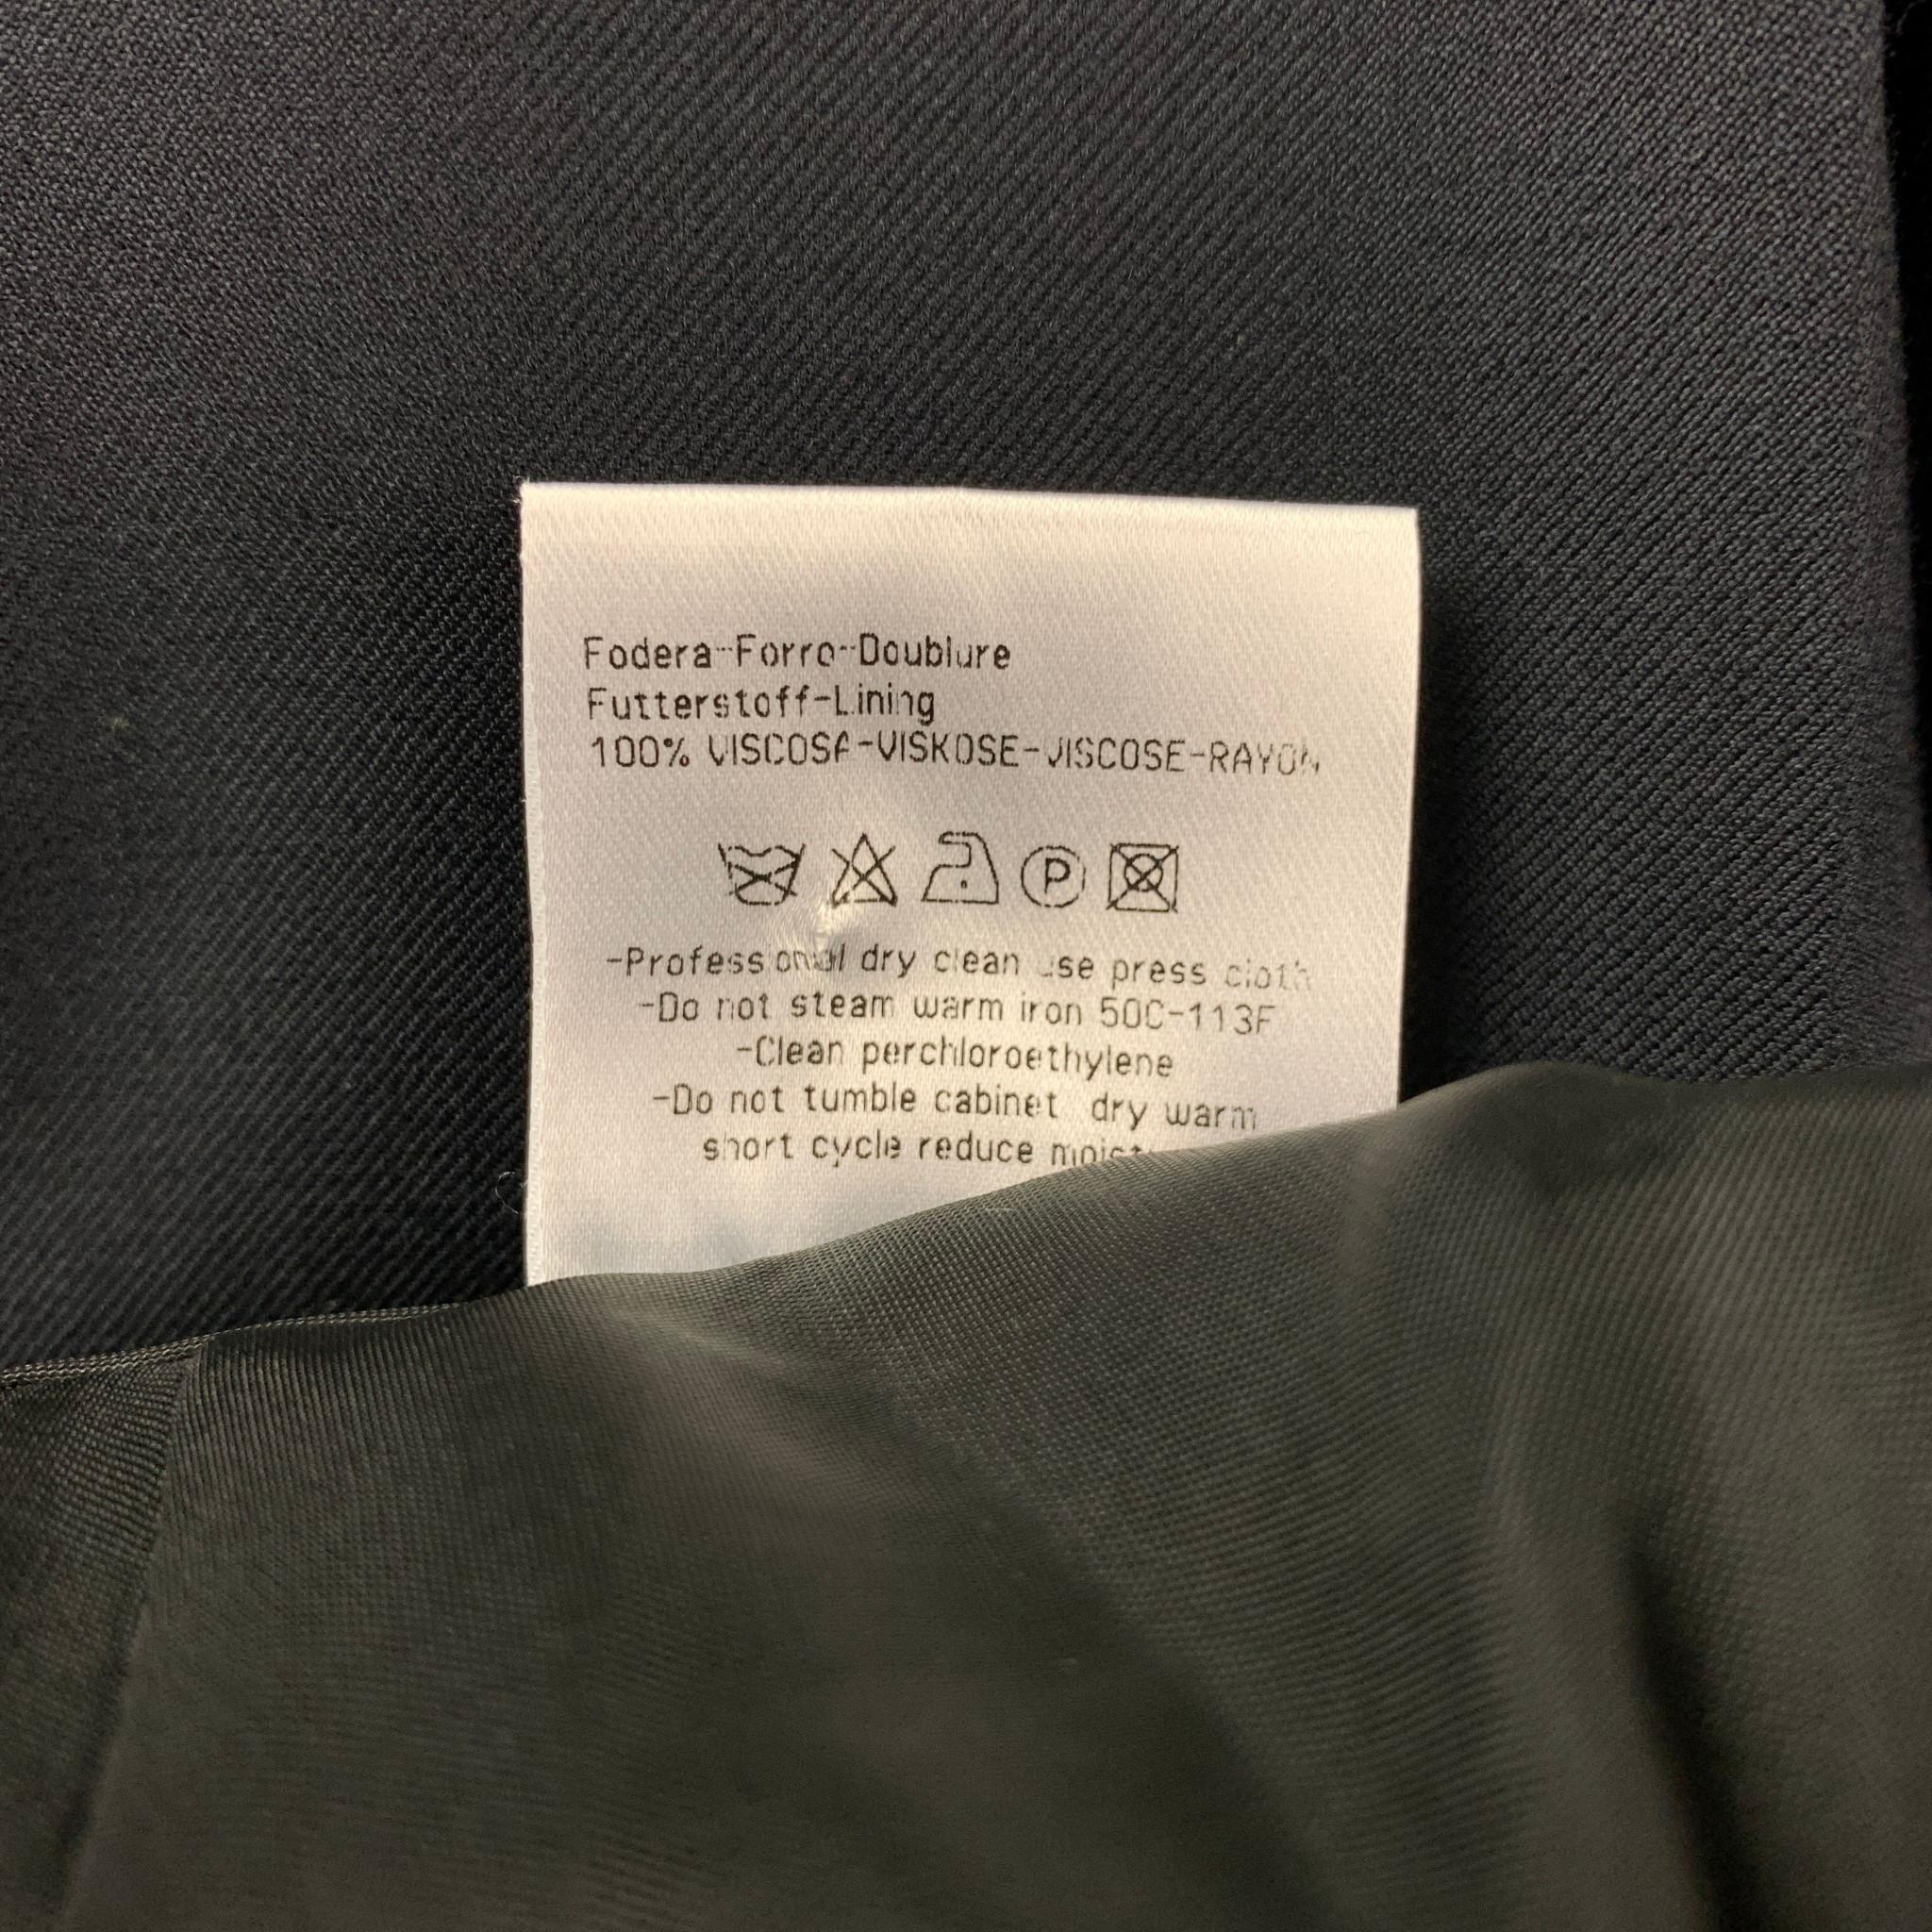 CALVIN KLEIN COLLECTION dress pants comes in a navy wool featuring a flat front, slit pockets, front tab, and a zip fly closure. 

Very Good Pre-Owned Condition.
Marked: 52/41

Measurements:

Waist: 34 in.
Rise: 10 in.
Inseam: 30 in. 